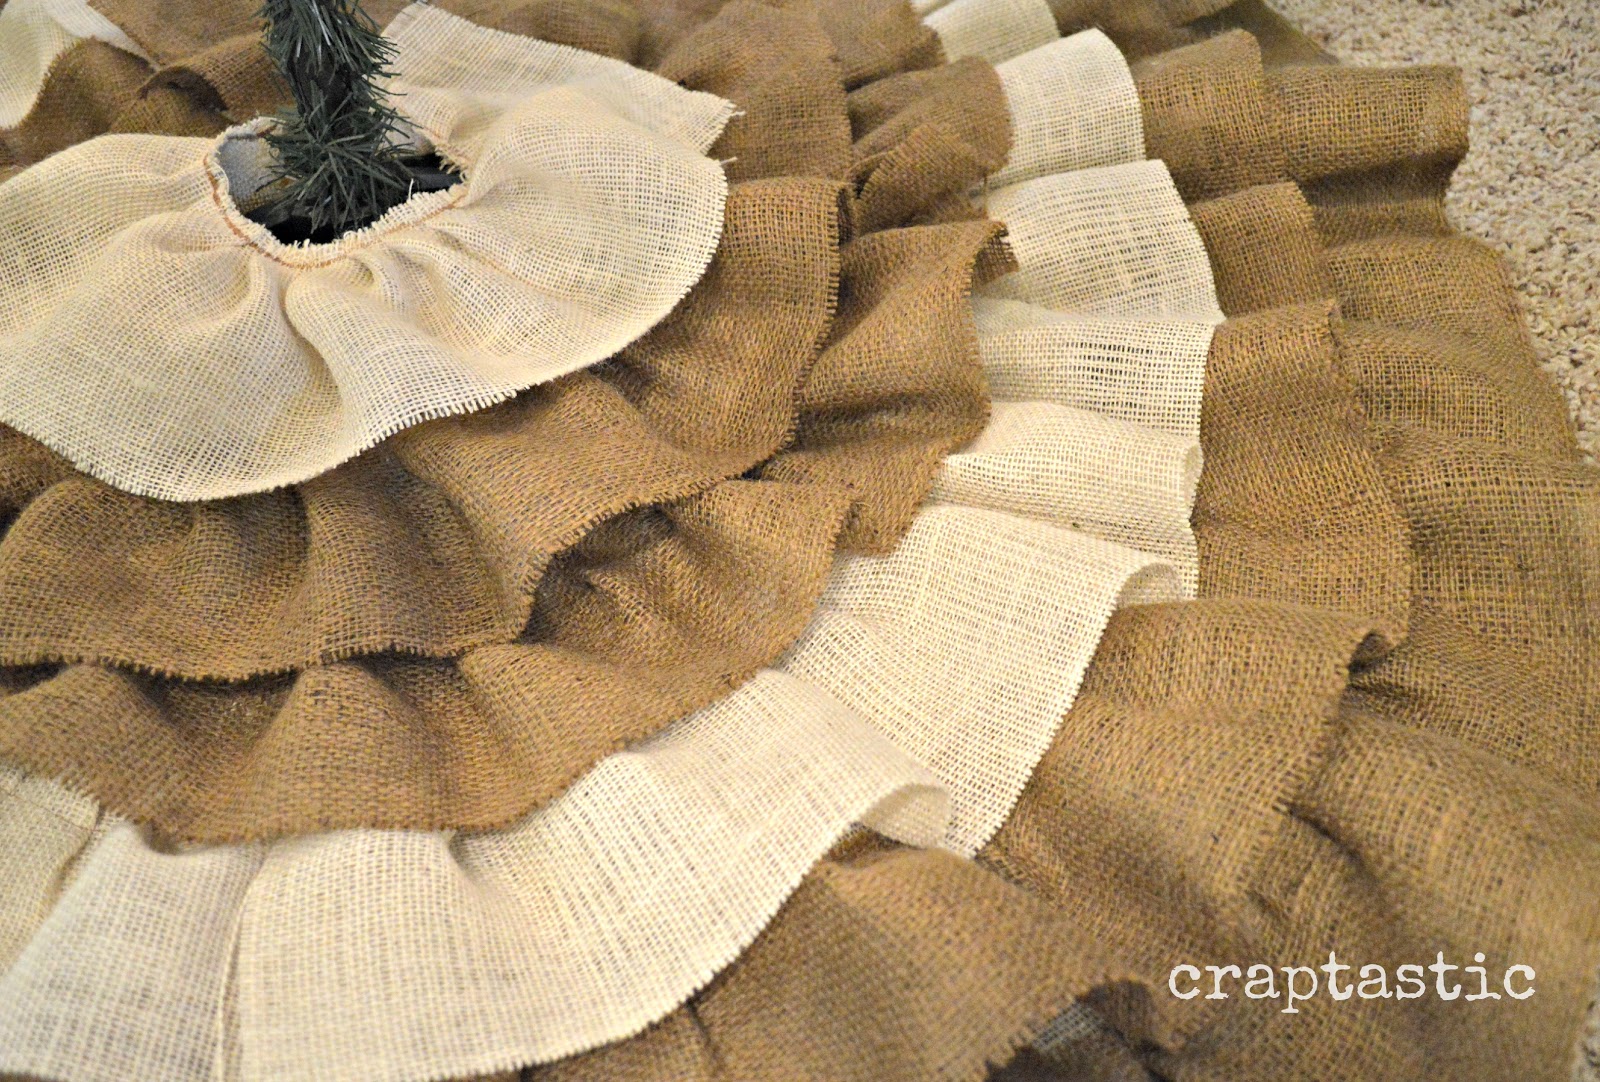 used two yards of burlap. It's only $4/yard and it was on sale for ...